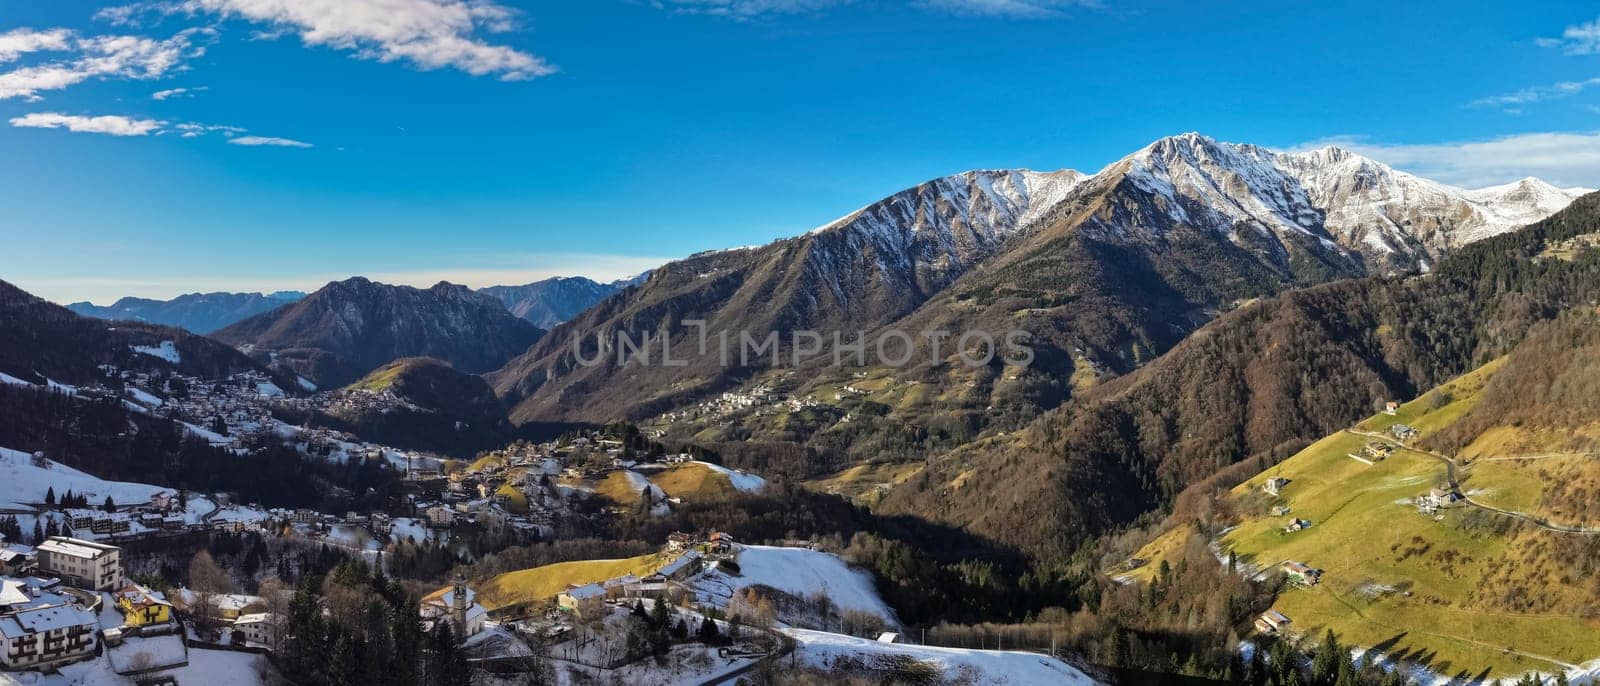 Aerial view of Riso valley and Orobie alps by Robertobinetti70